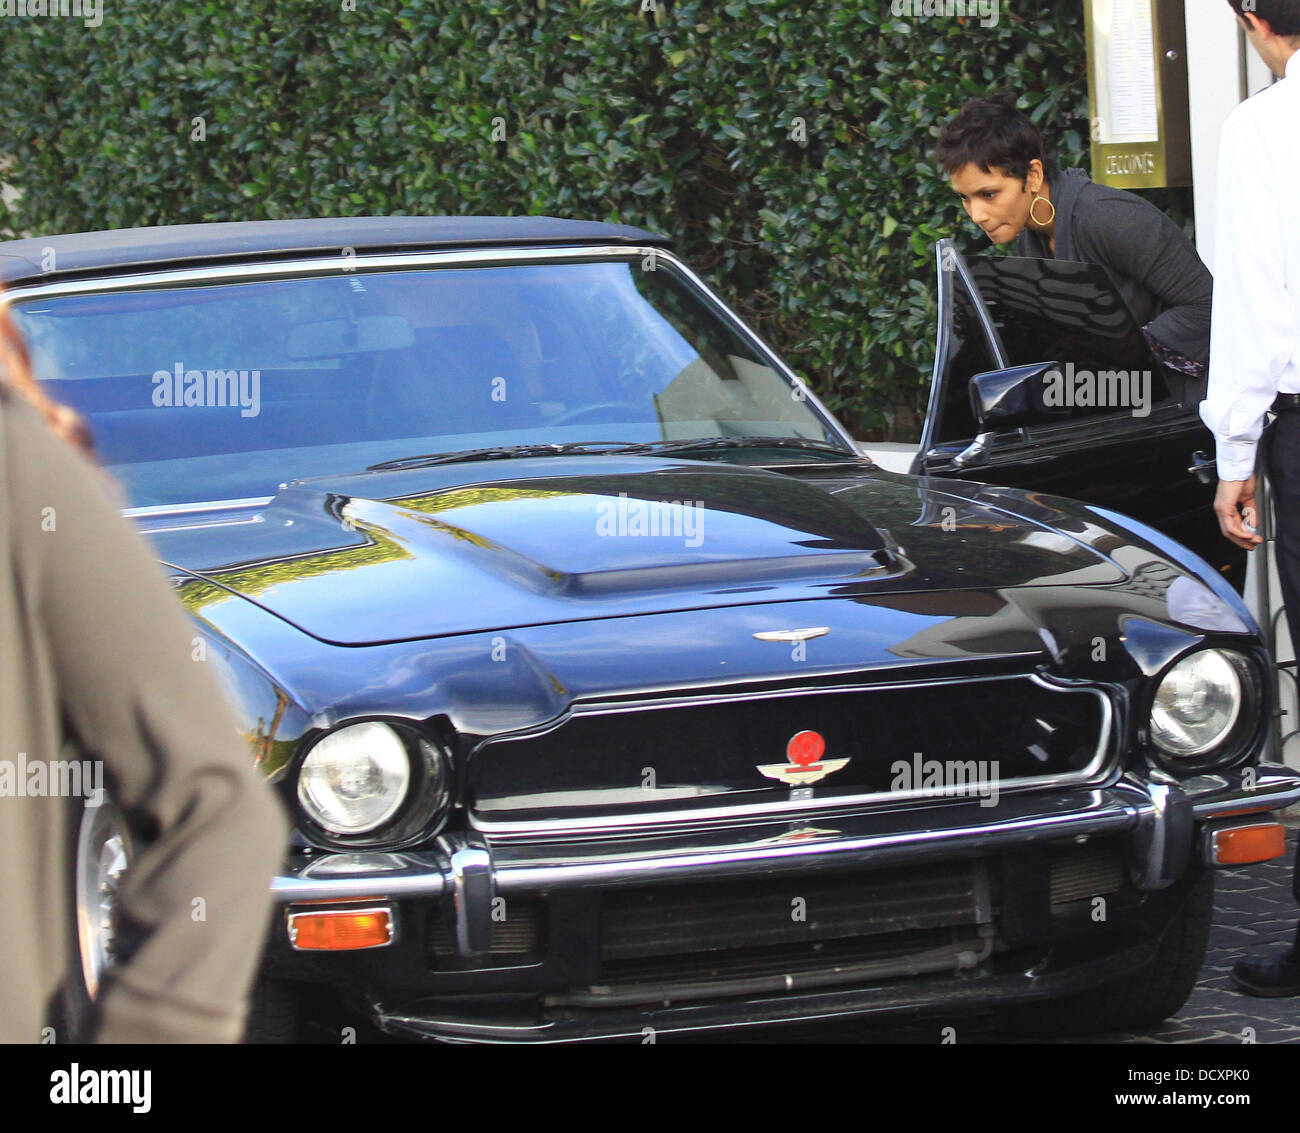 Halle Berry leaves in a black Aston Martin V8 Vantage Volante after having lunch in West Hollywood. Los Angeles, California - 29.12.11 Stock Photo